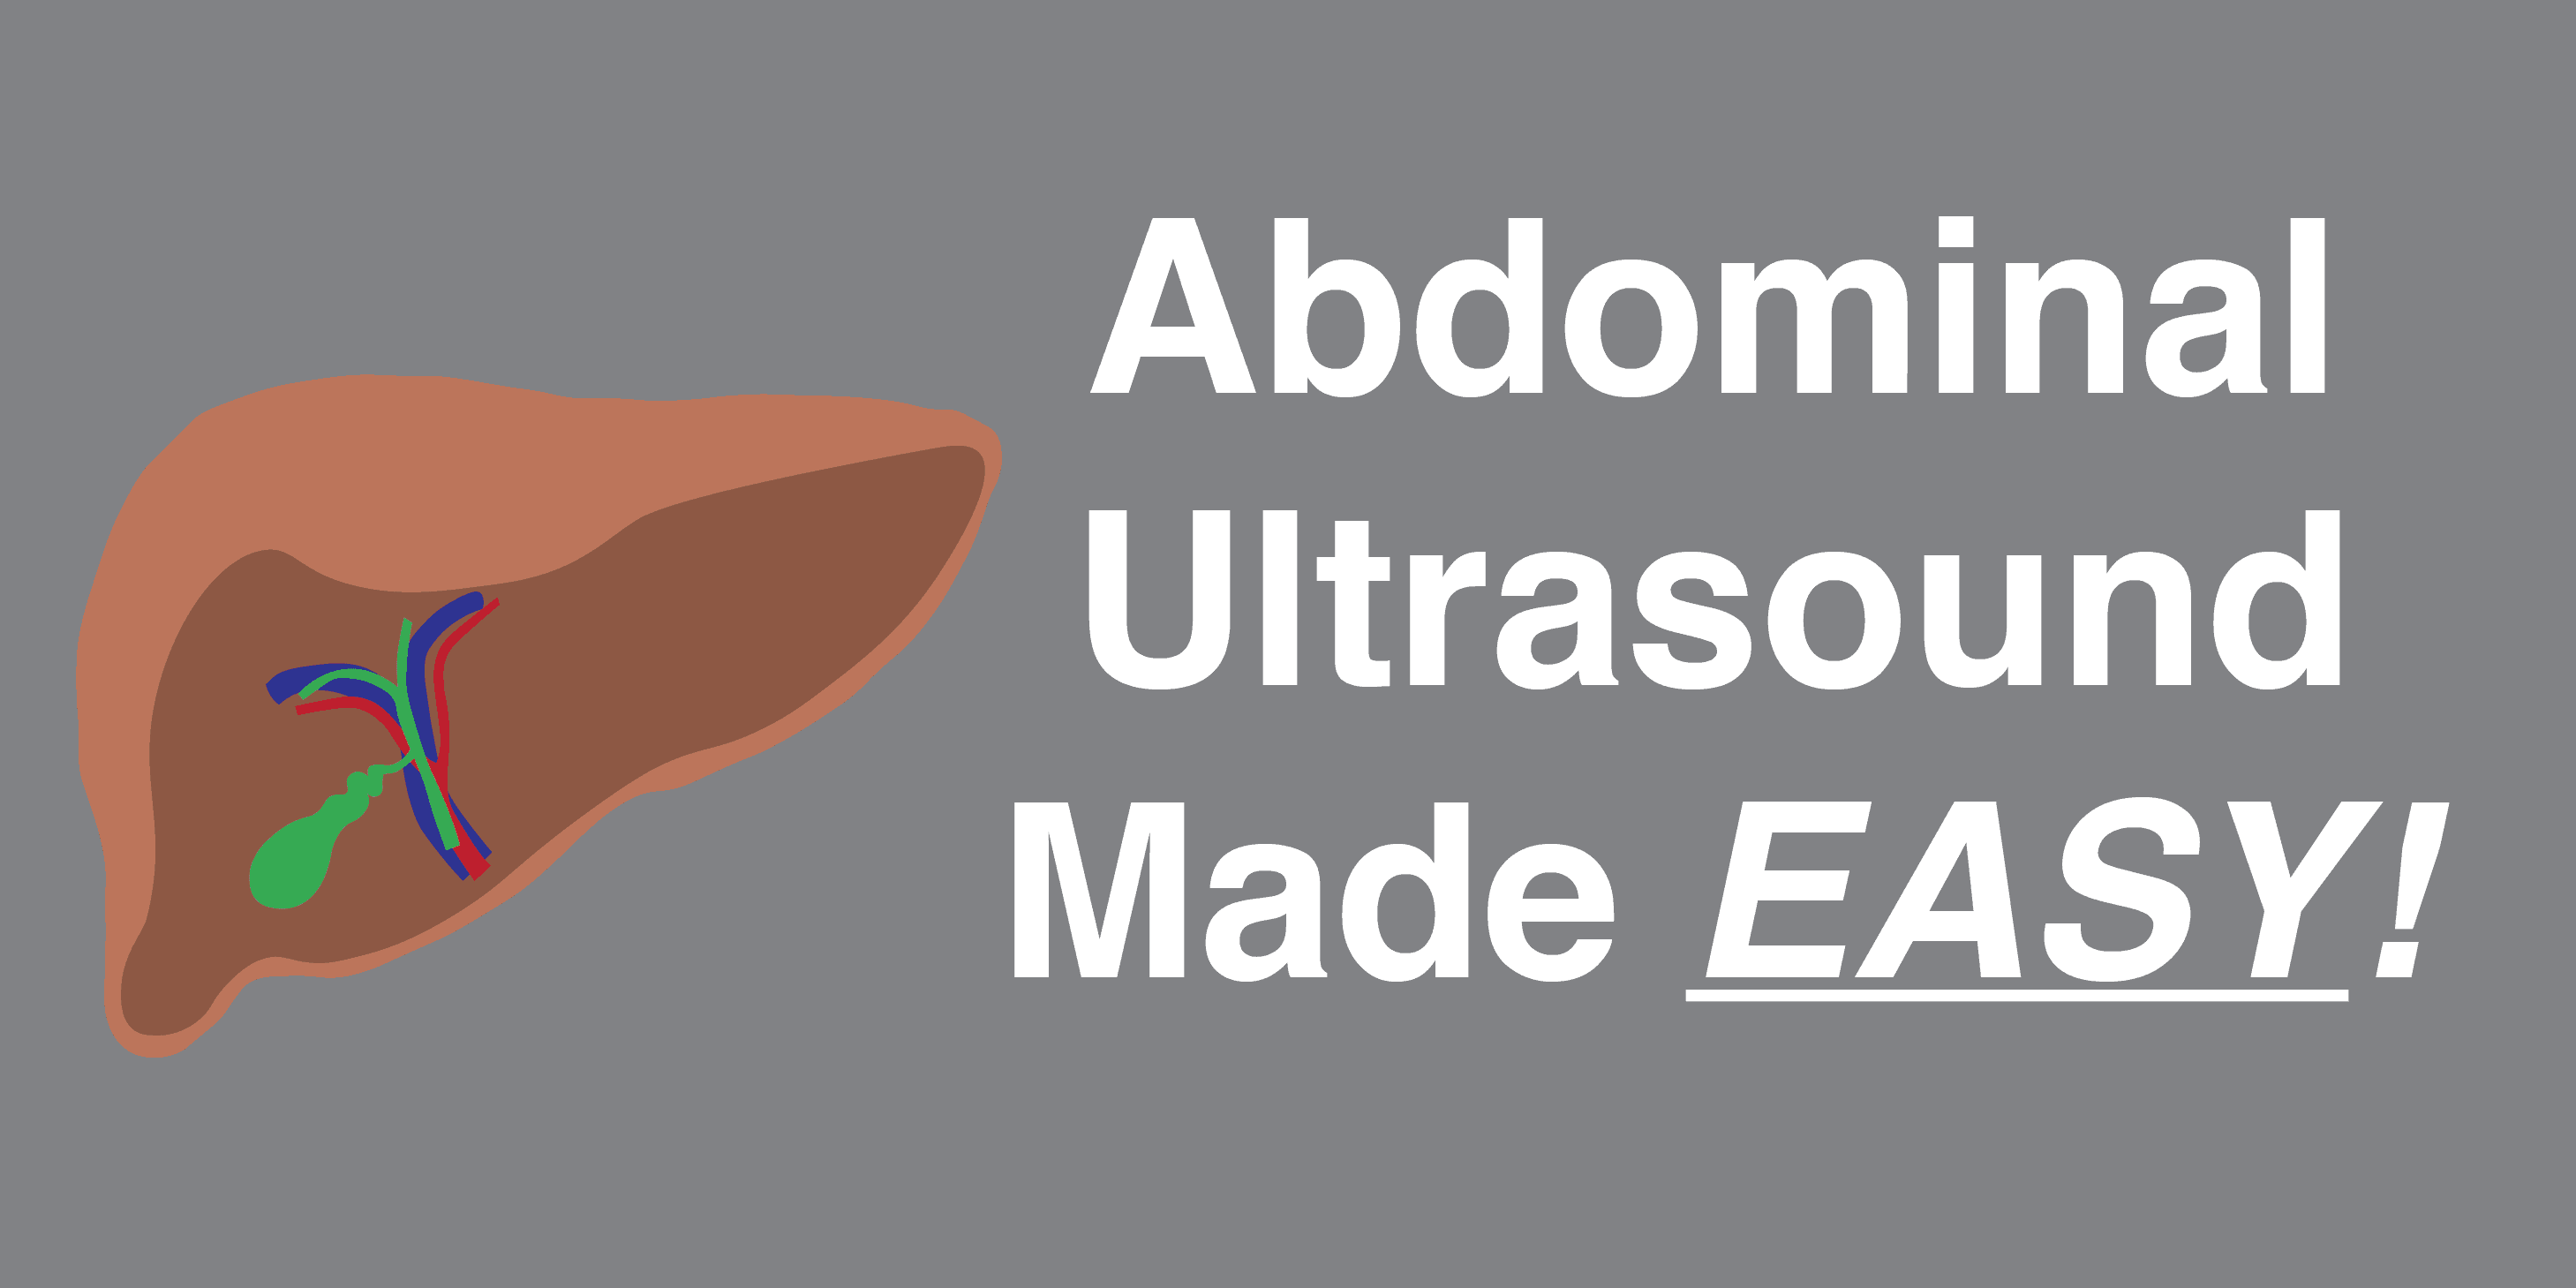 Abdominal Ultrasound Made Easy: Step-By-Step Guide - POCUS 101